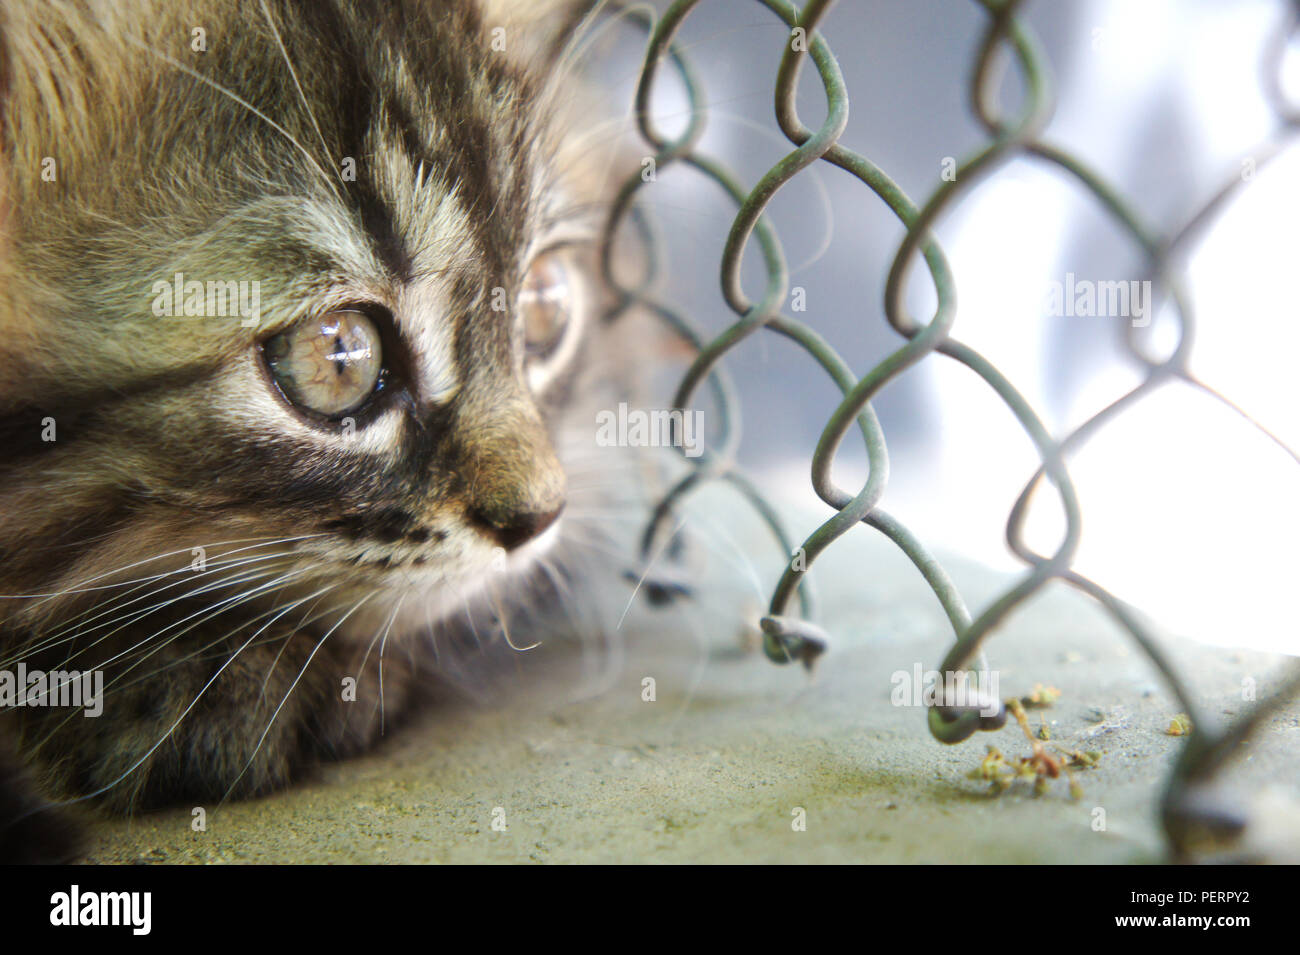 curious cat, little cute kitten close-up looks through the net to the street, locked up Stock Photo